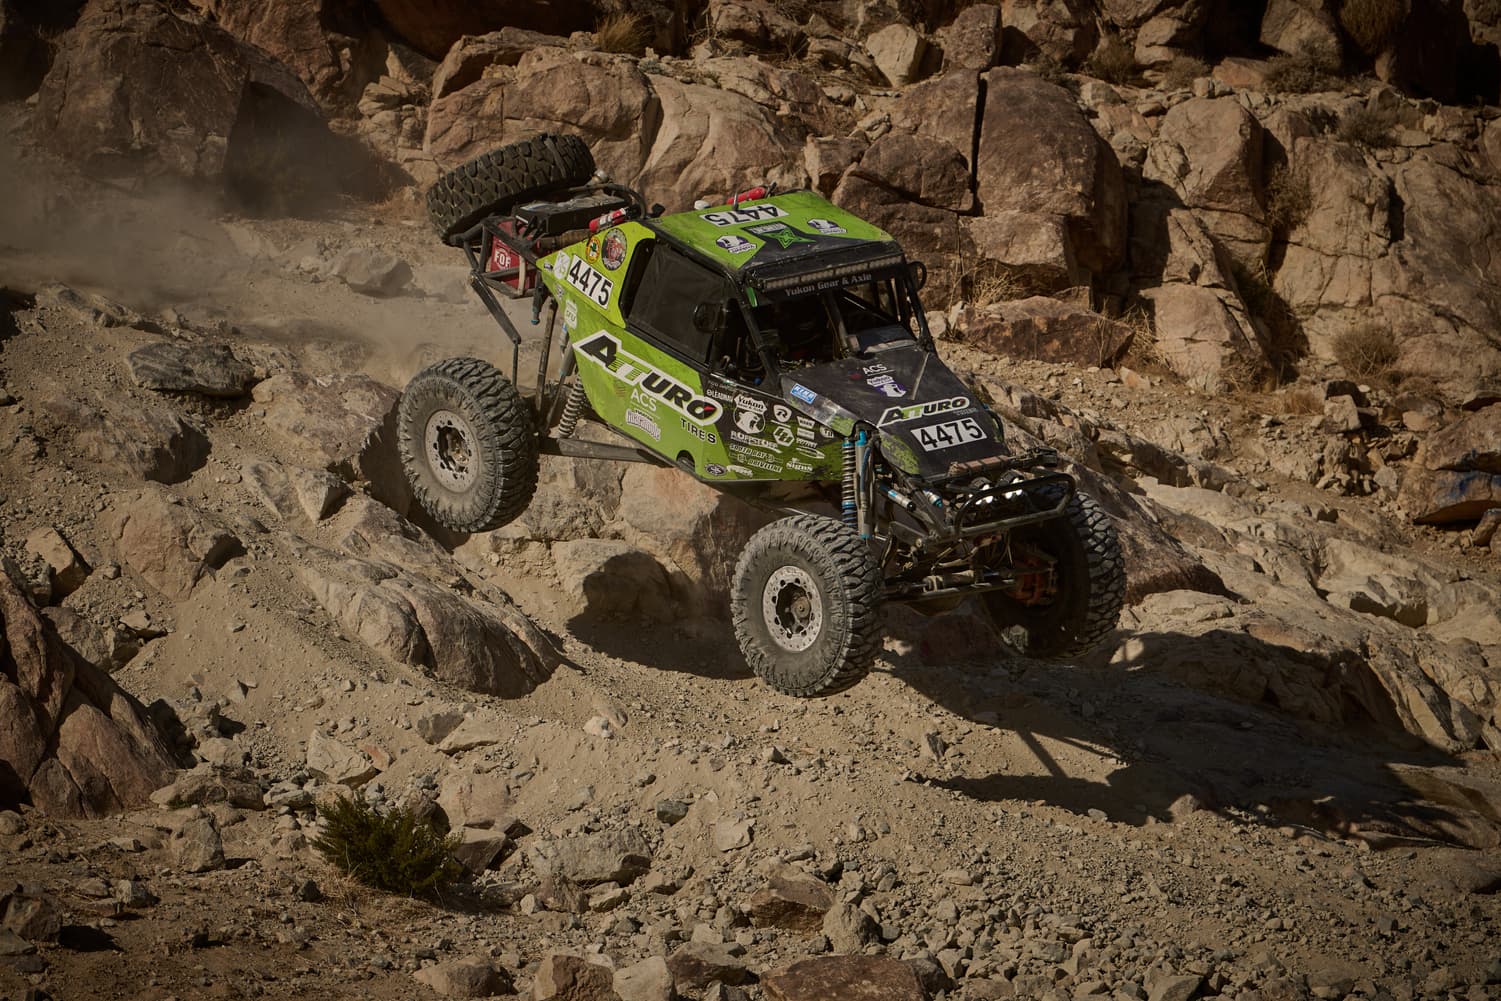 ATTURO TIRE CORP. EXPANDS OFF-ROAD RACER SUPPORT THROUGH NEW CONTINGENCY PROGRAM